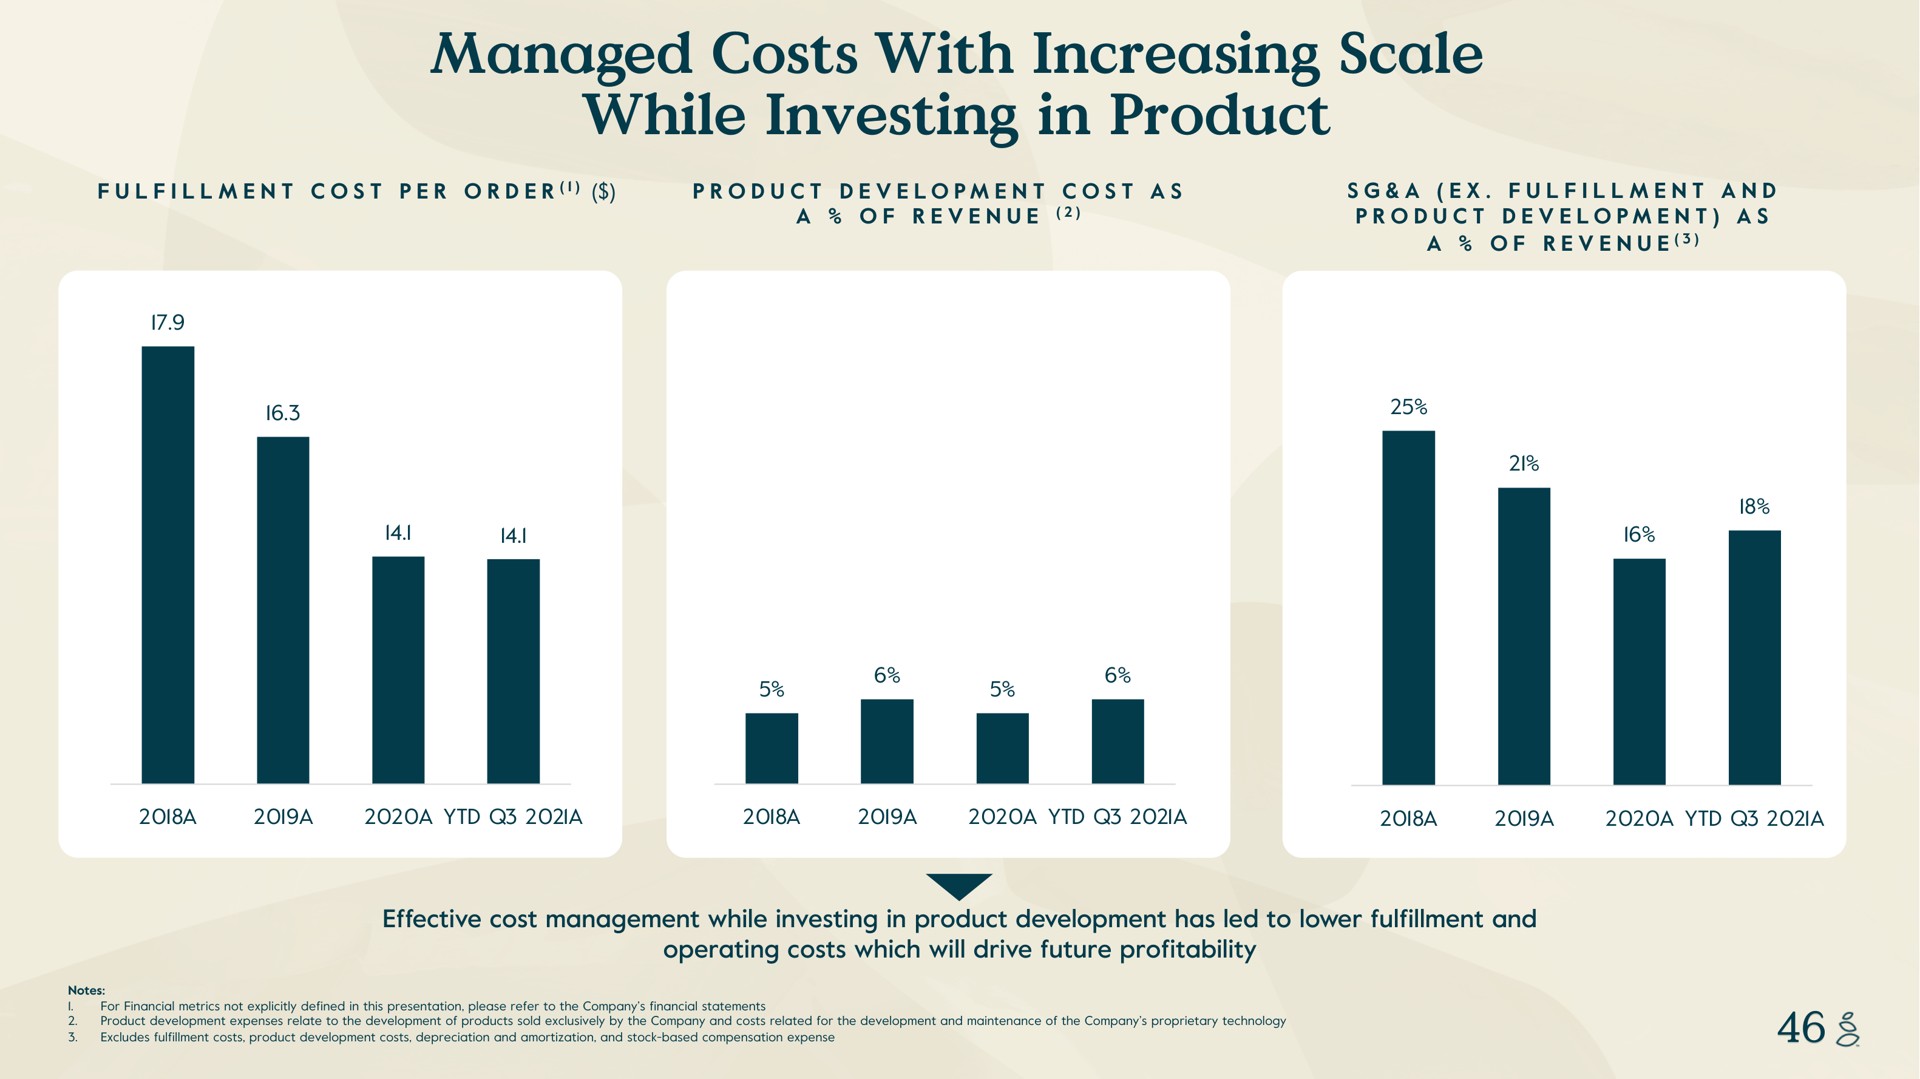 managed costs with increasing scale while investing in product fulfillment cost per order development cost as a of revenue a fulfillment and development as a of revenue i i a a a a a a a a a effective cost management development has led to lower fulfillment and operating which will drive future profitability notes i for financial metrics not explicitly defined this presentation please refer to the company financial statements development expenses relate to the development of products sold exclusively by the company and related for the development and maintenance of the company proprietary technology excludes fulfillment development depreciation and amortization and stock based compensation expense | Grove